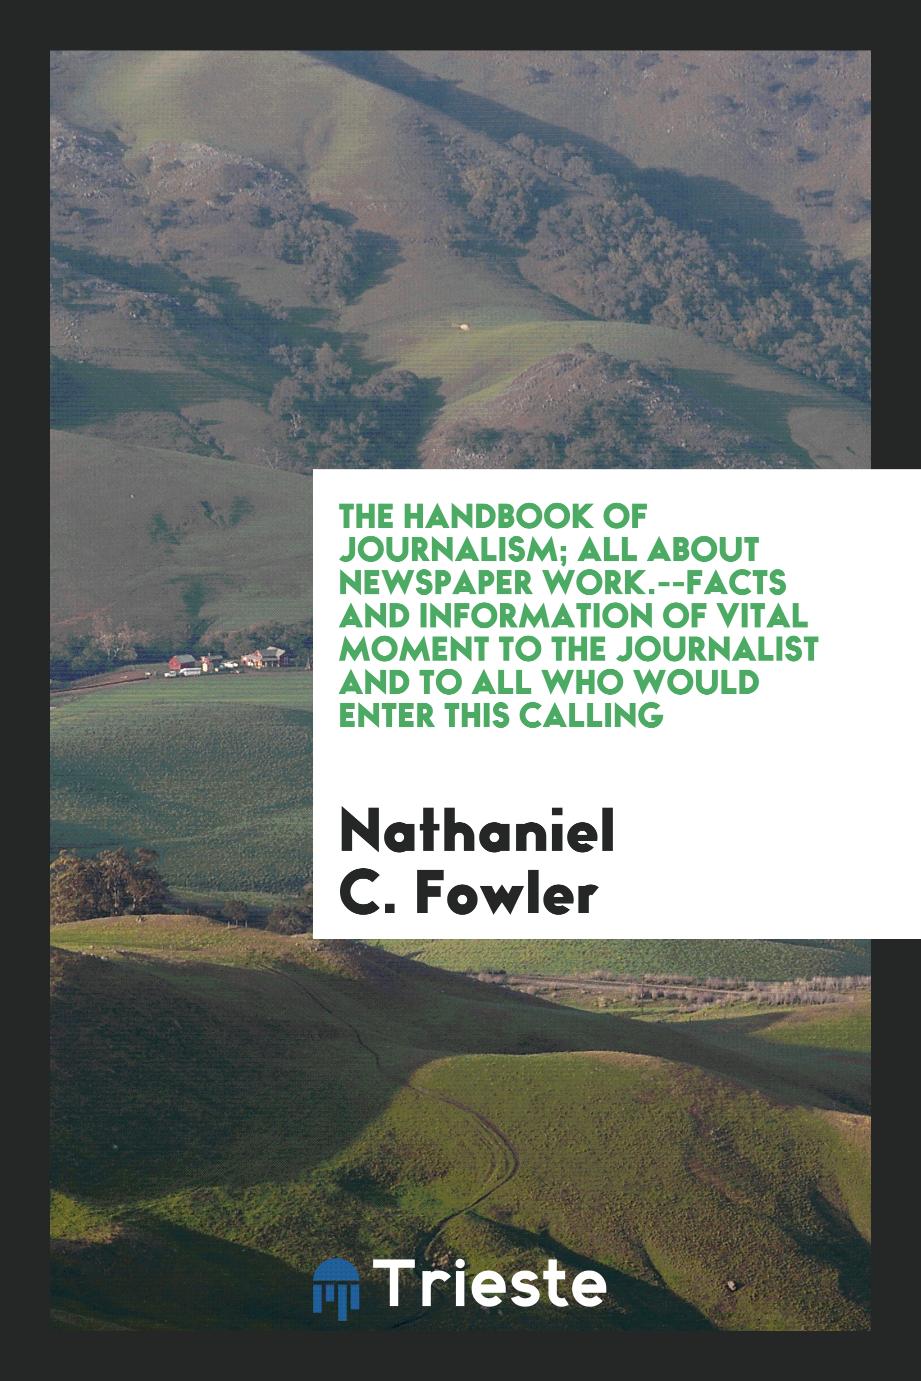 The handbook of journalism; all about newspaper work.--Facts and information of vital moment to the journalist and to all who would enter this calling